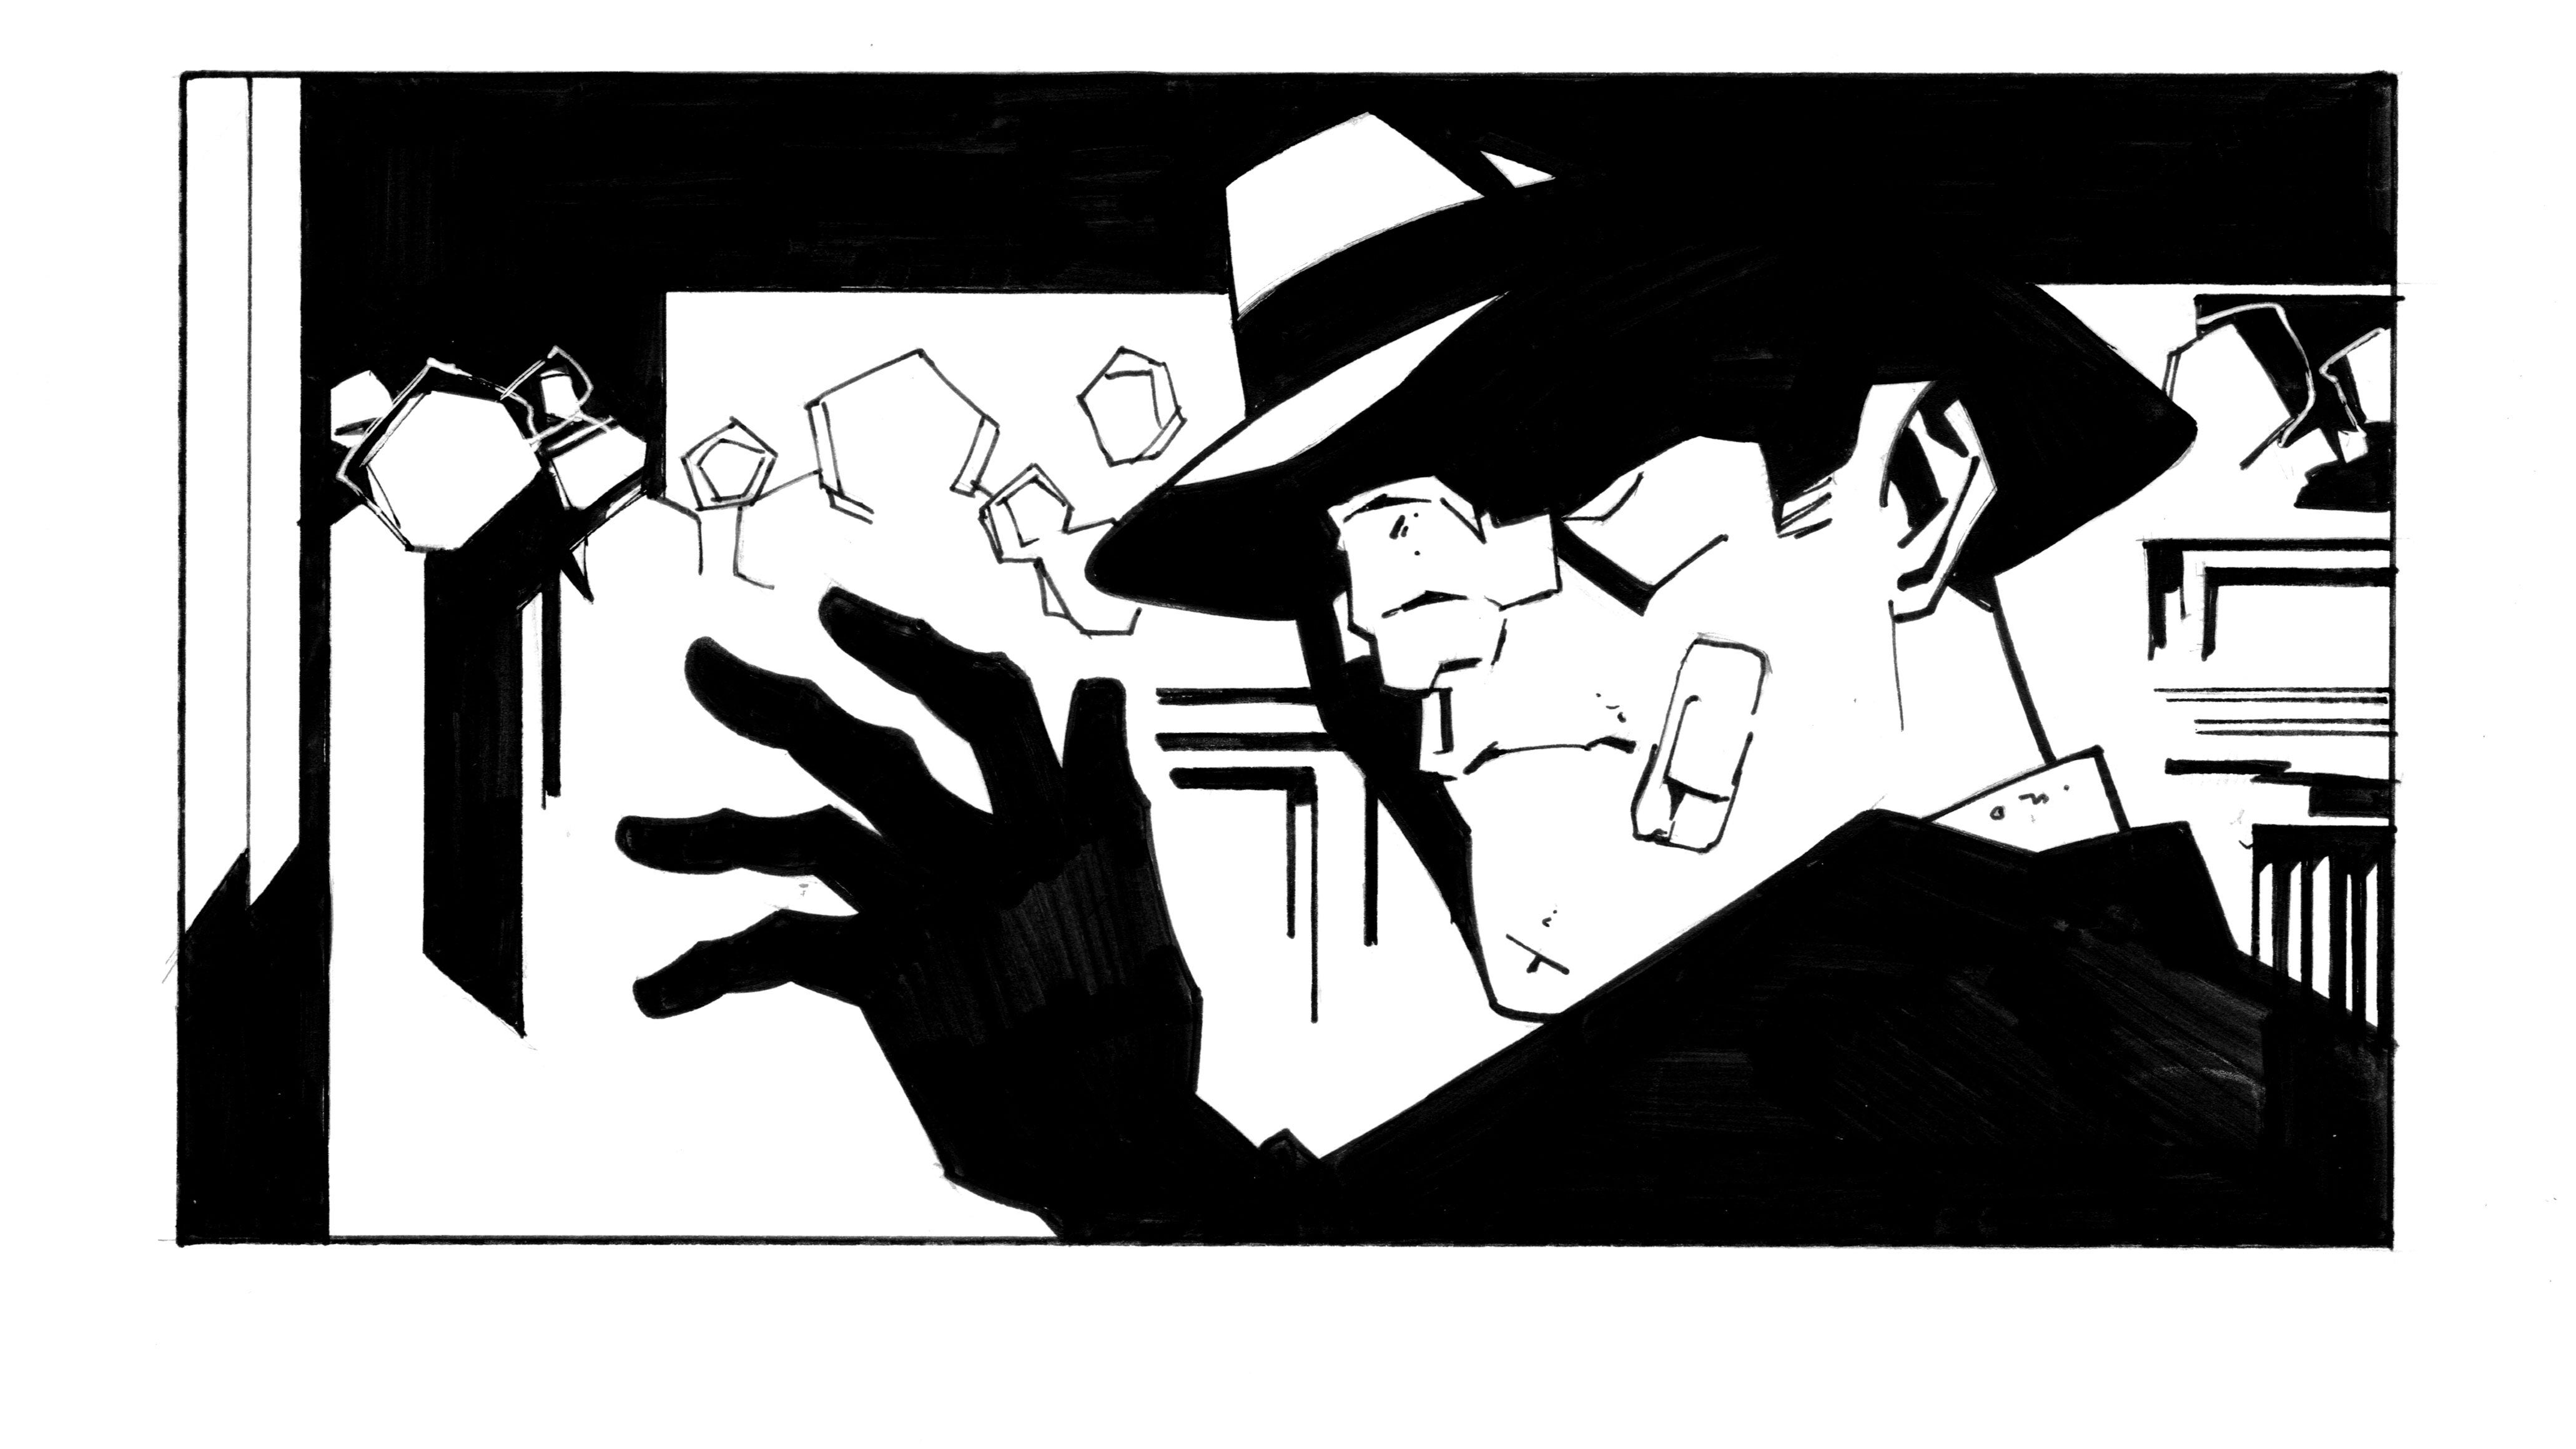 Gotham City: Year One #1 unlettered, uncolored excerpt by Phil Hester & Eric Gapstur